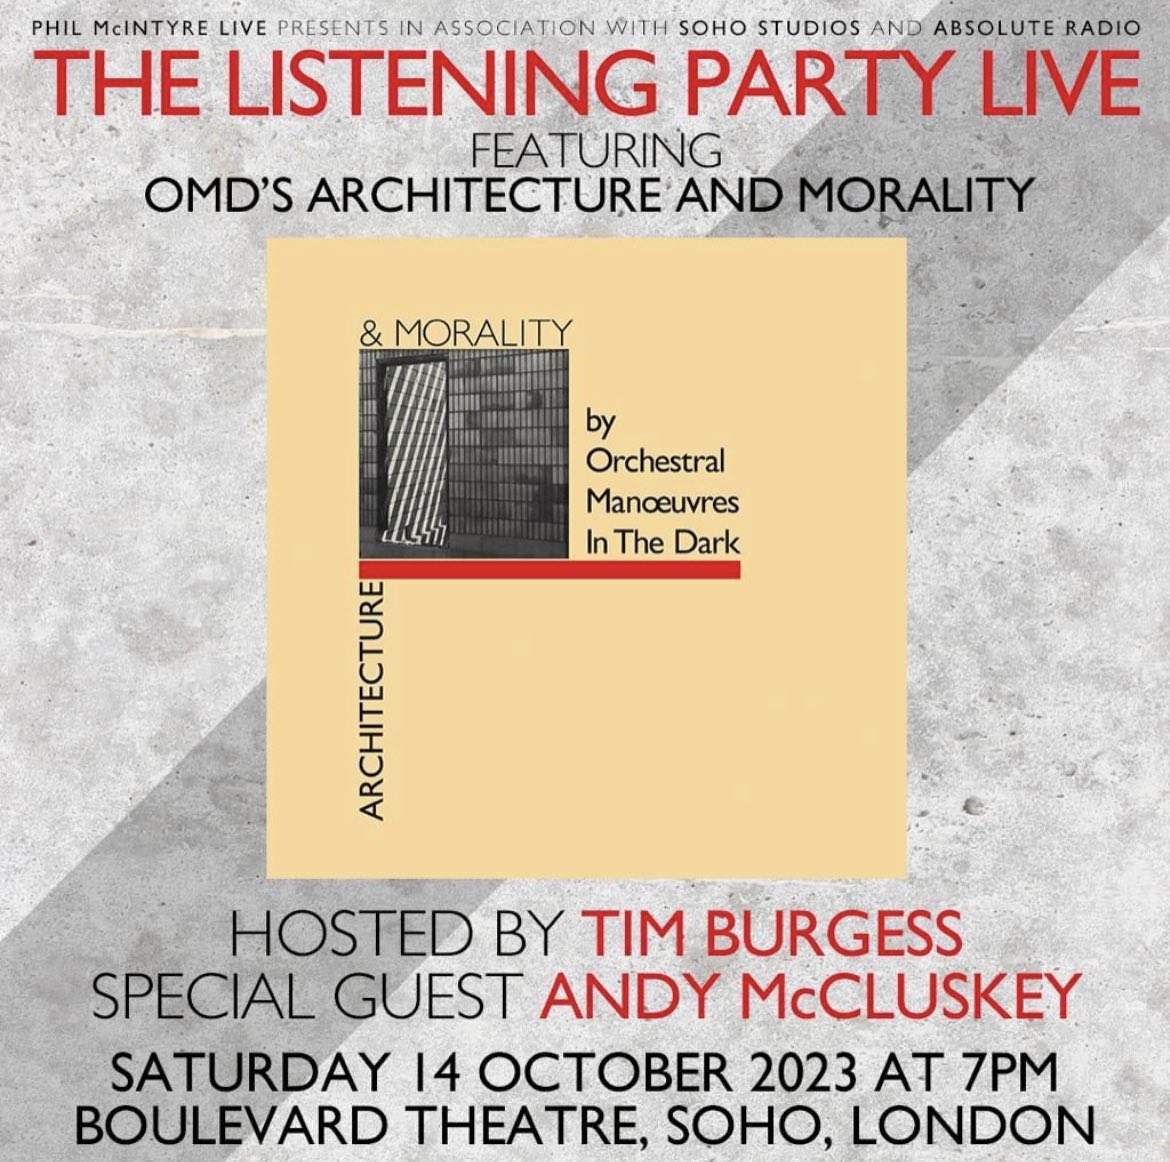 I’ll be hosting @LlSTENlNG_PARTY live Retweet to win 2 tickets for @OfficialOMD and me at @boulevardSoho in london on Saturday October 14th Tickets on sale tomorrow at 10.00am I’ll announce the winner tomorrow at 9.00am